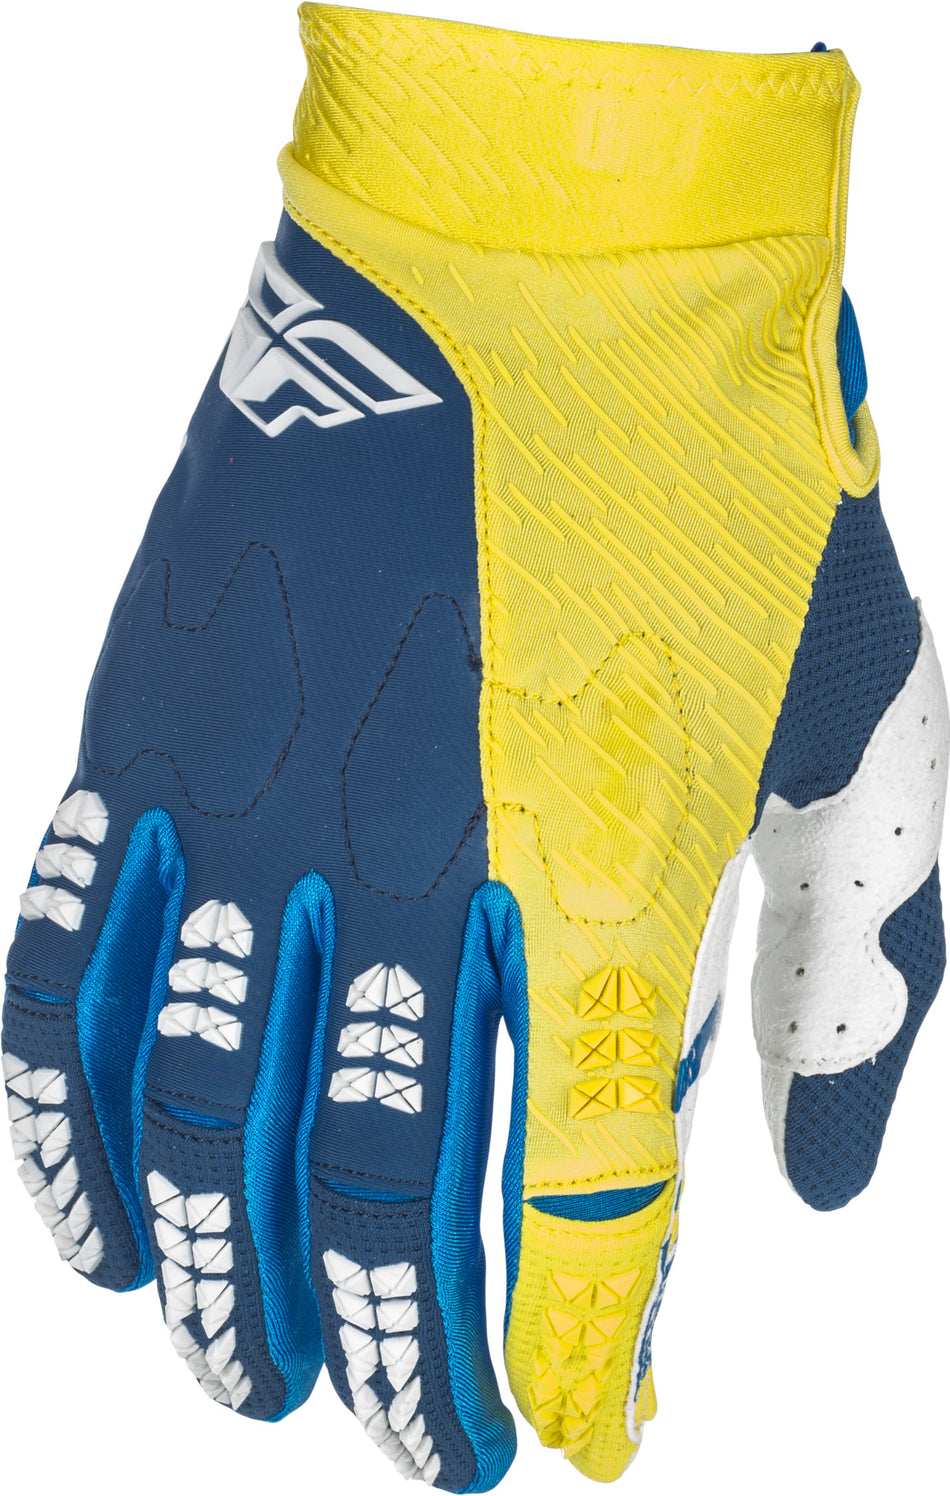 FLY RACING Evolution 2.0 Gloves Navy/Yellow Sz 11 371-11111